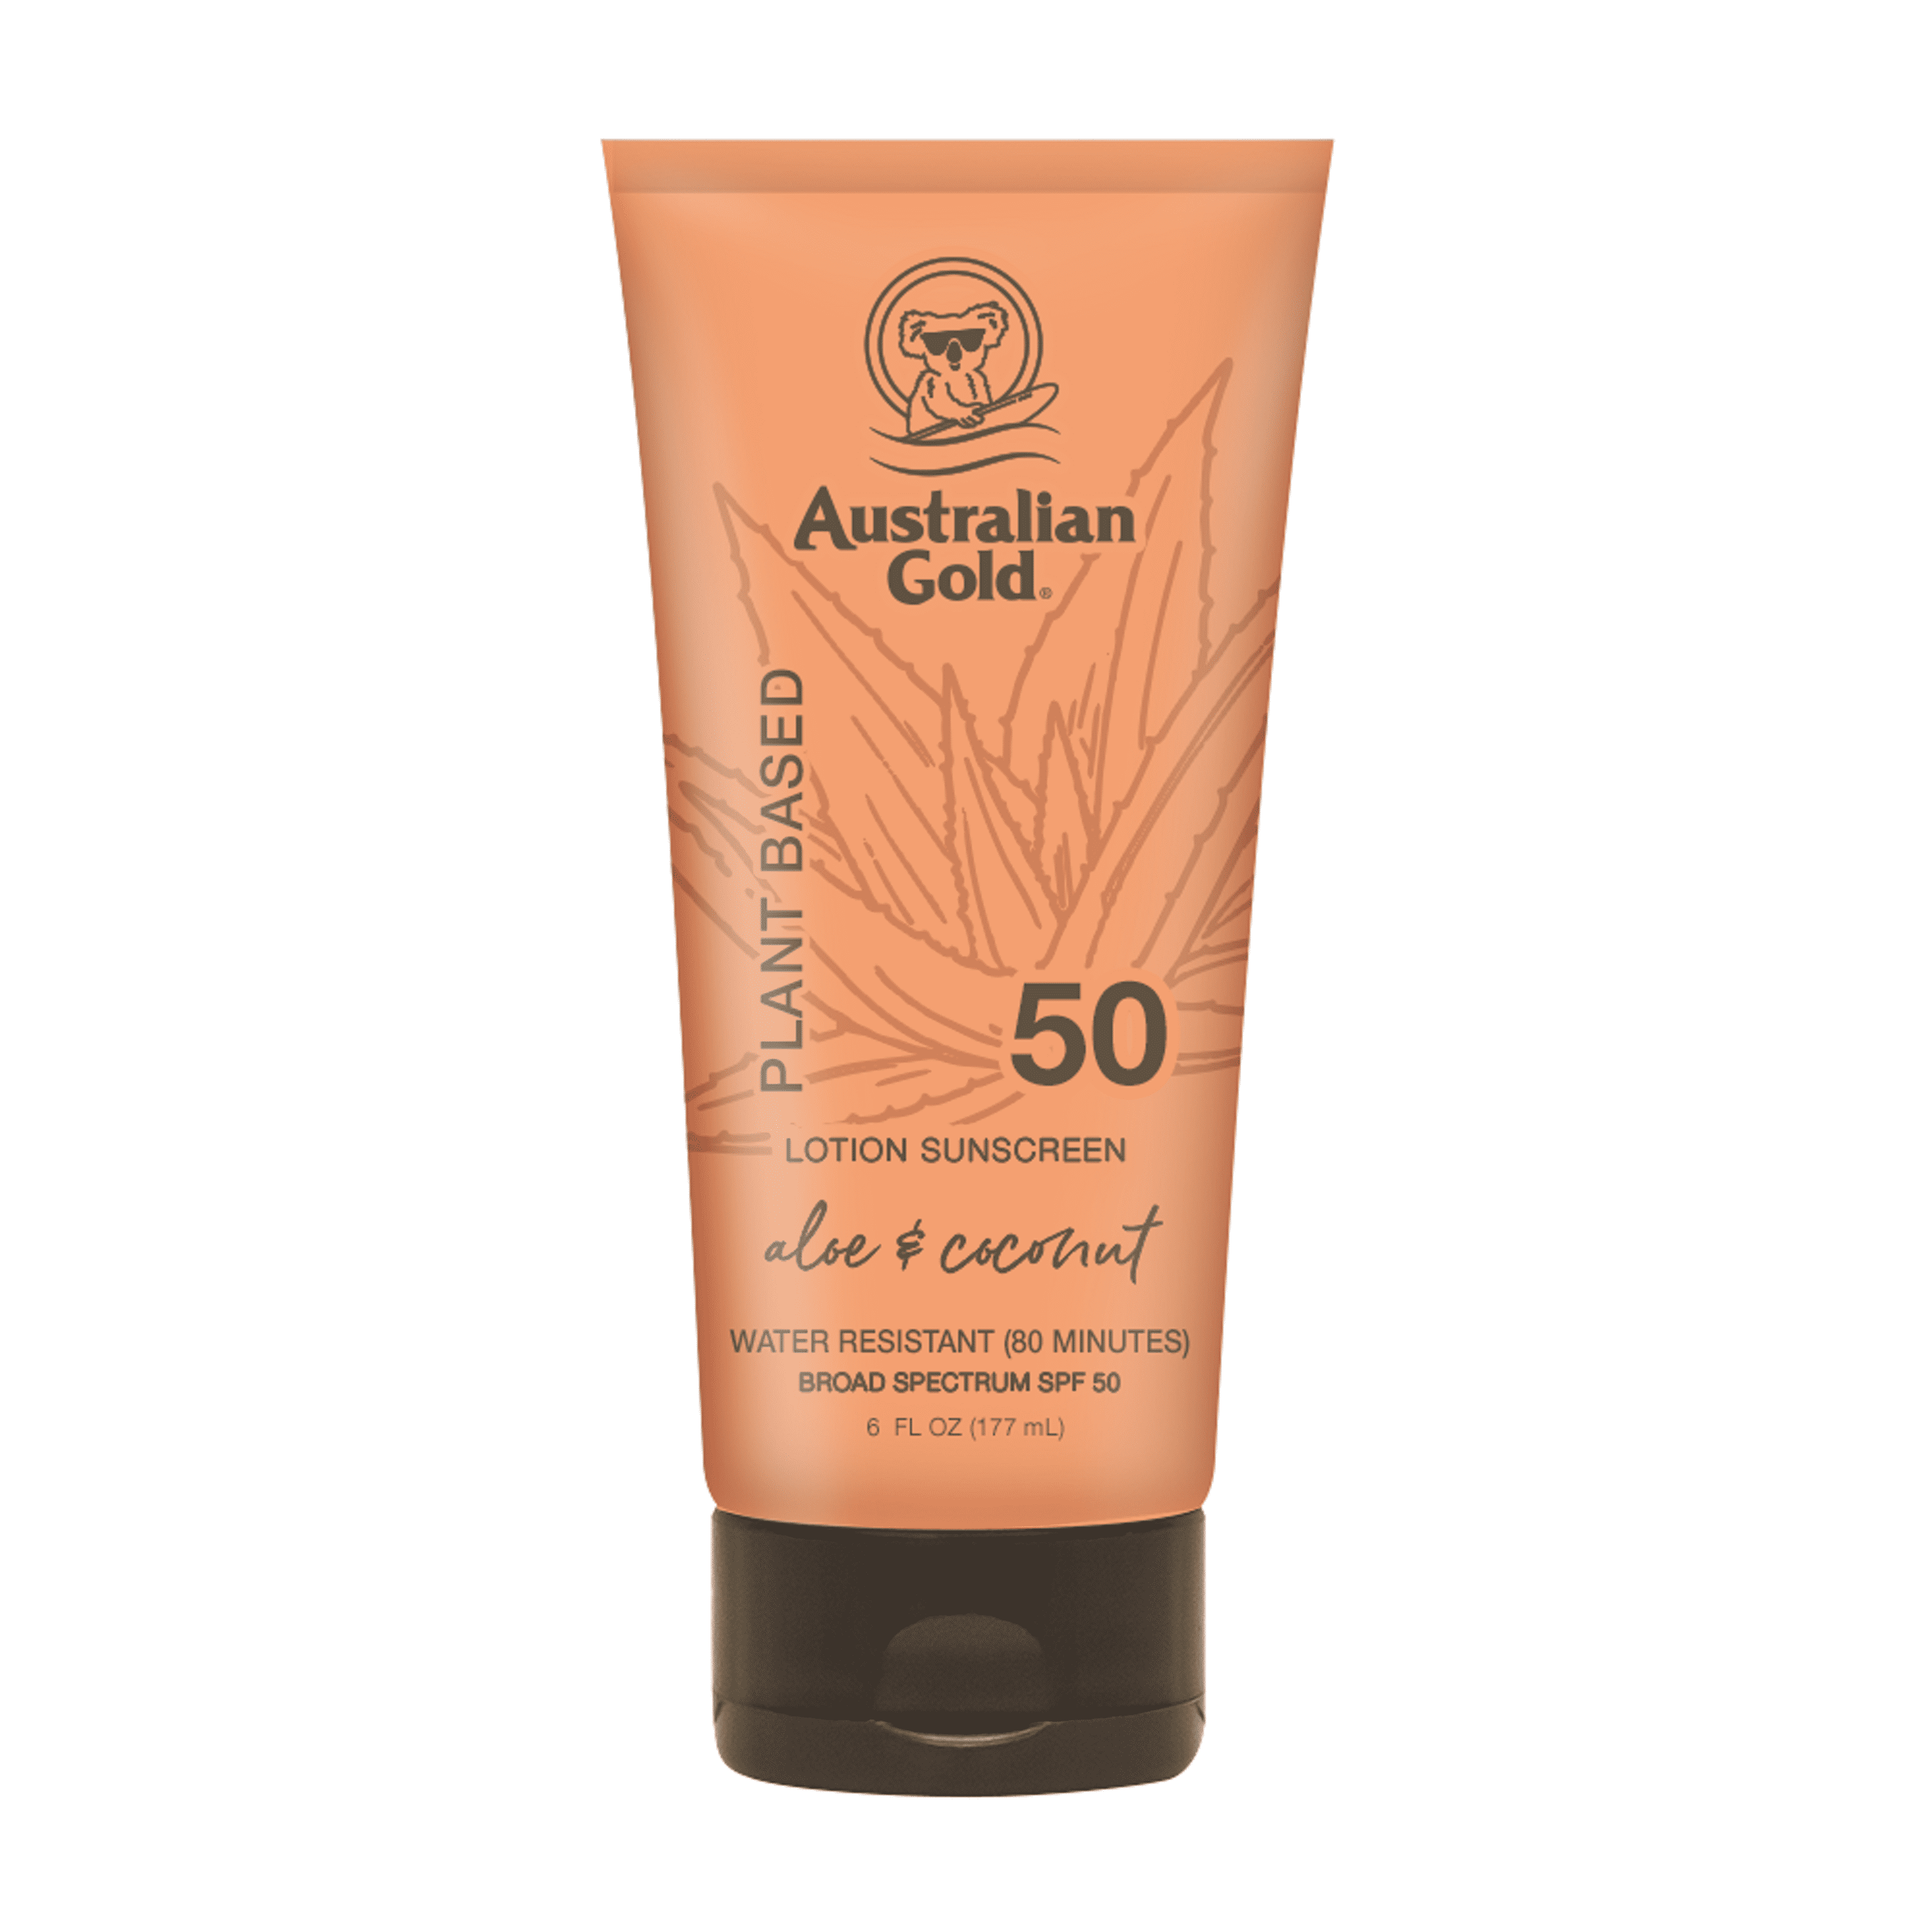 Australian Gold Botanical Mineral Lotion for SPF 50, 5 Ounce | Broad Spectrum Water - Walmart.com